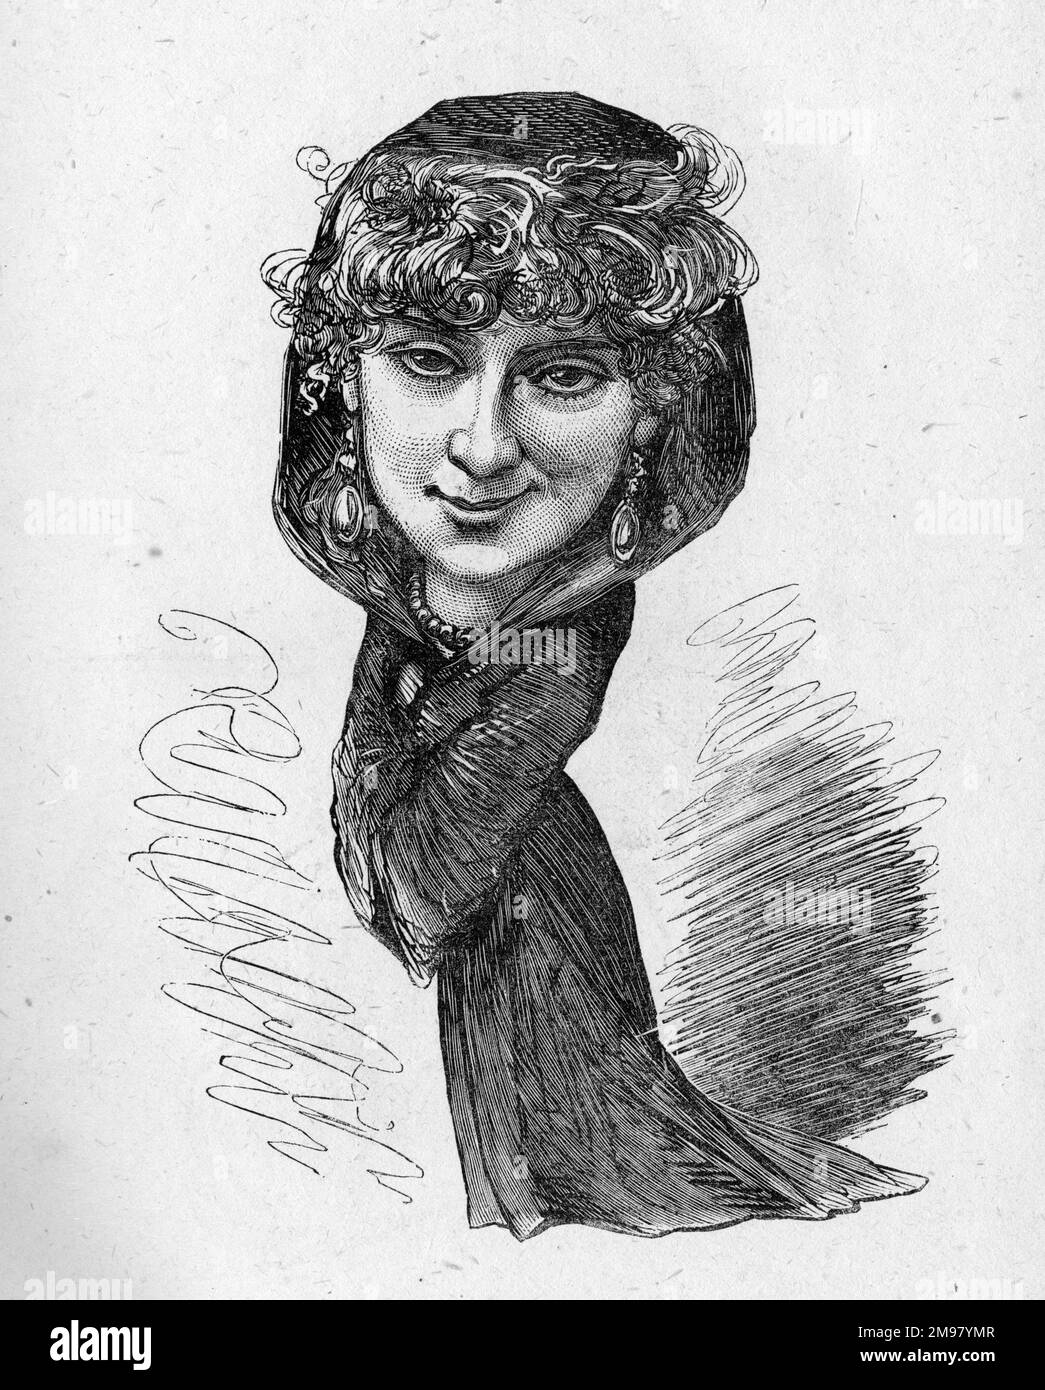 Cartoon of Florence St John (1855-1912), English singer and actress, seen here in the role of Madame Favart, in an English version of Offenbach's operetta of the same name which earned her critical acclaim when it opened at the Strand Theatre, London, in 1879. Stock Photo